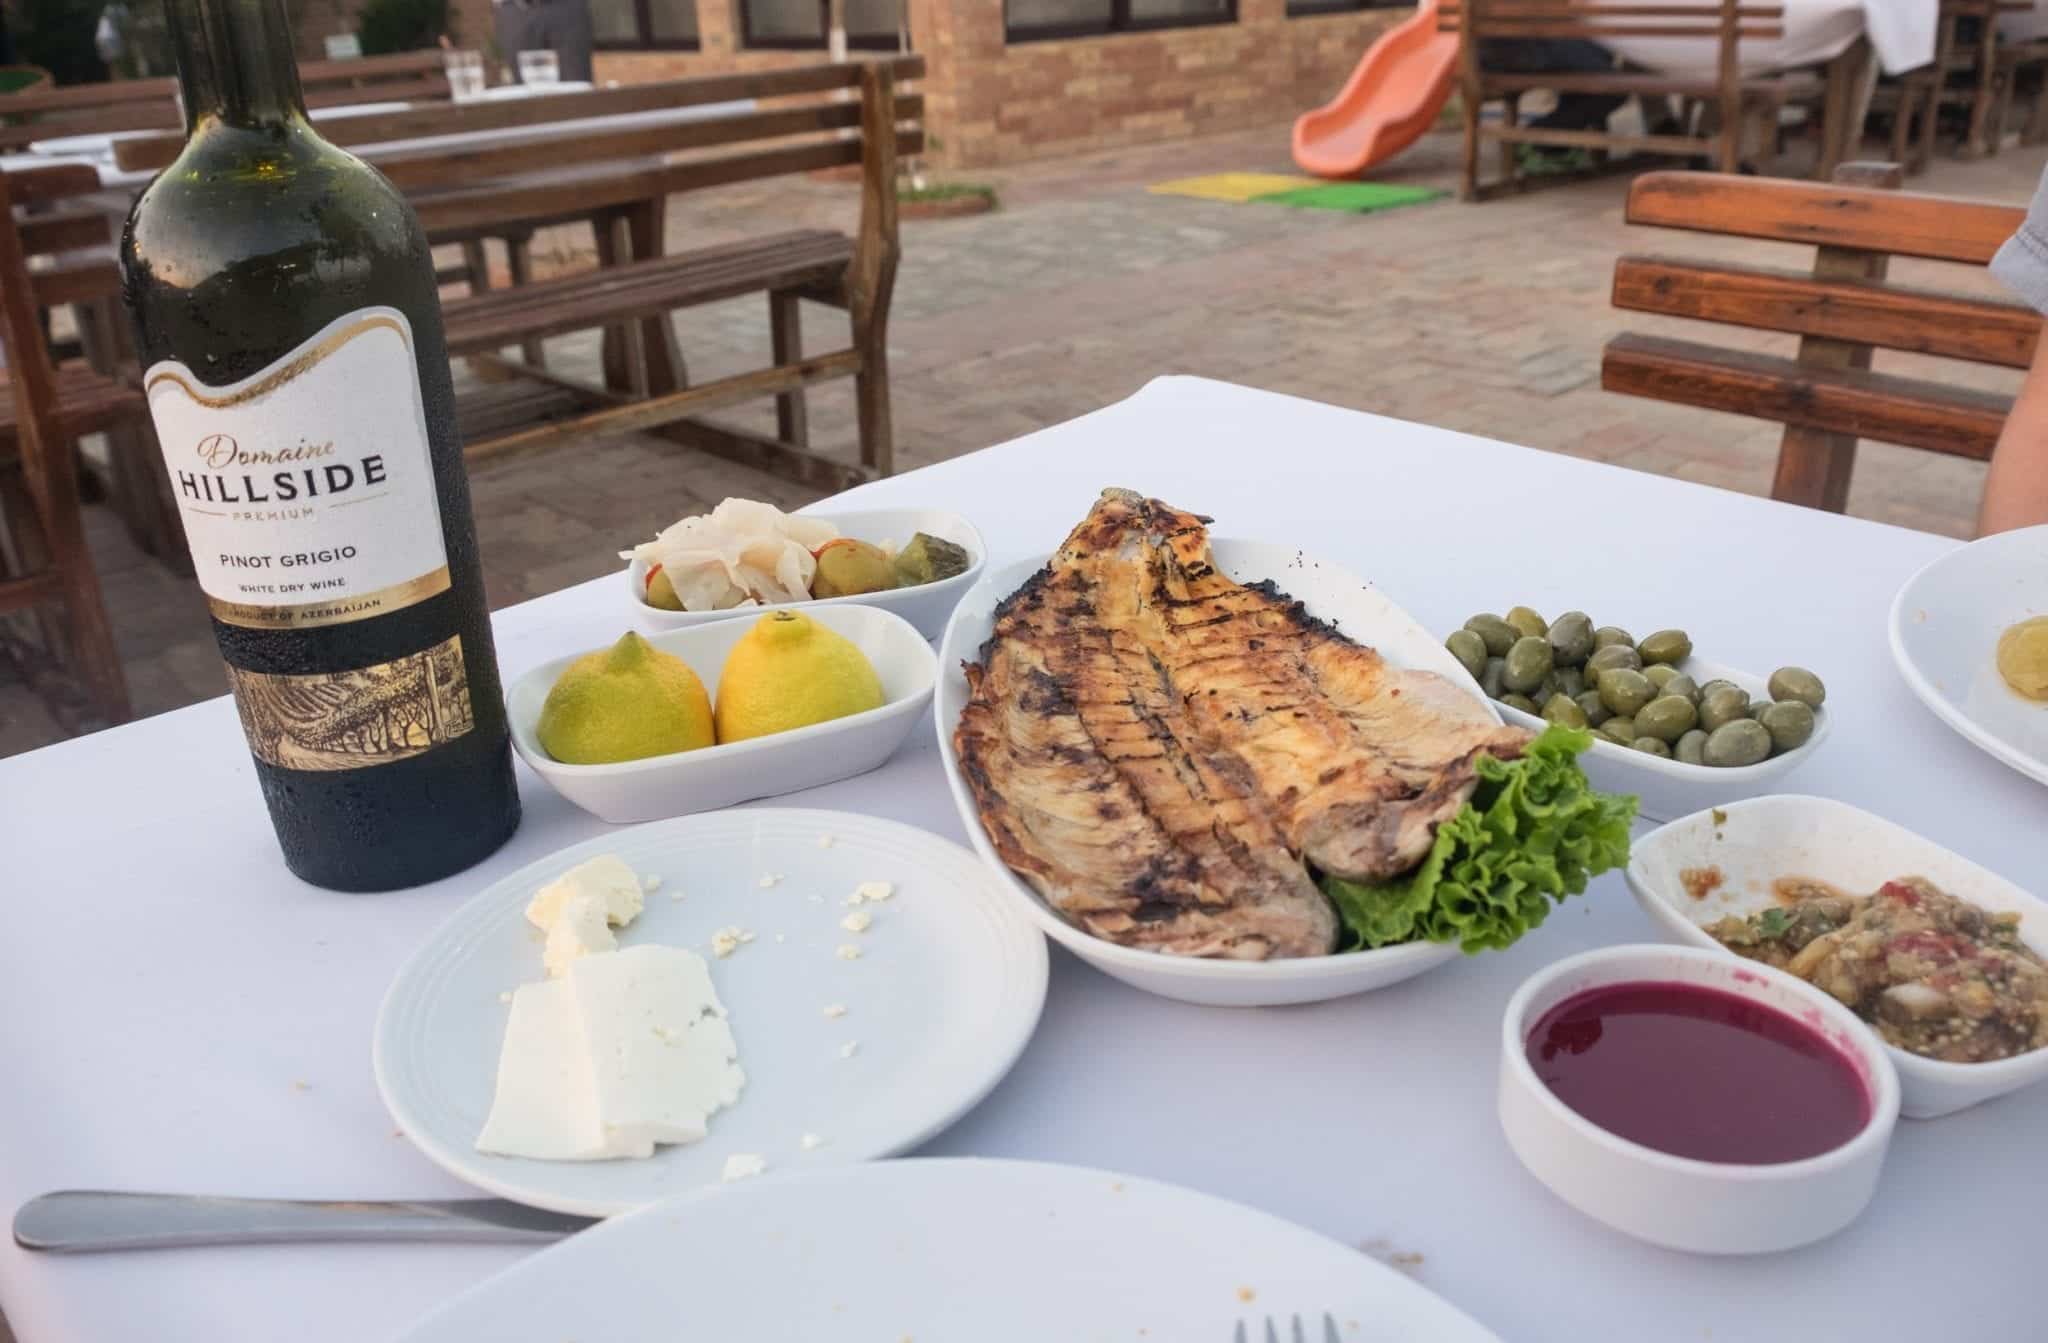 A meal at Derya Fish house: fish, wine, and several vegetable dishes and bread.